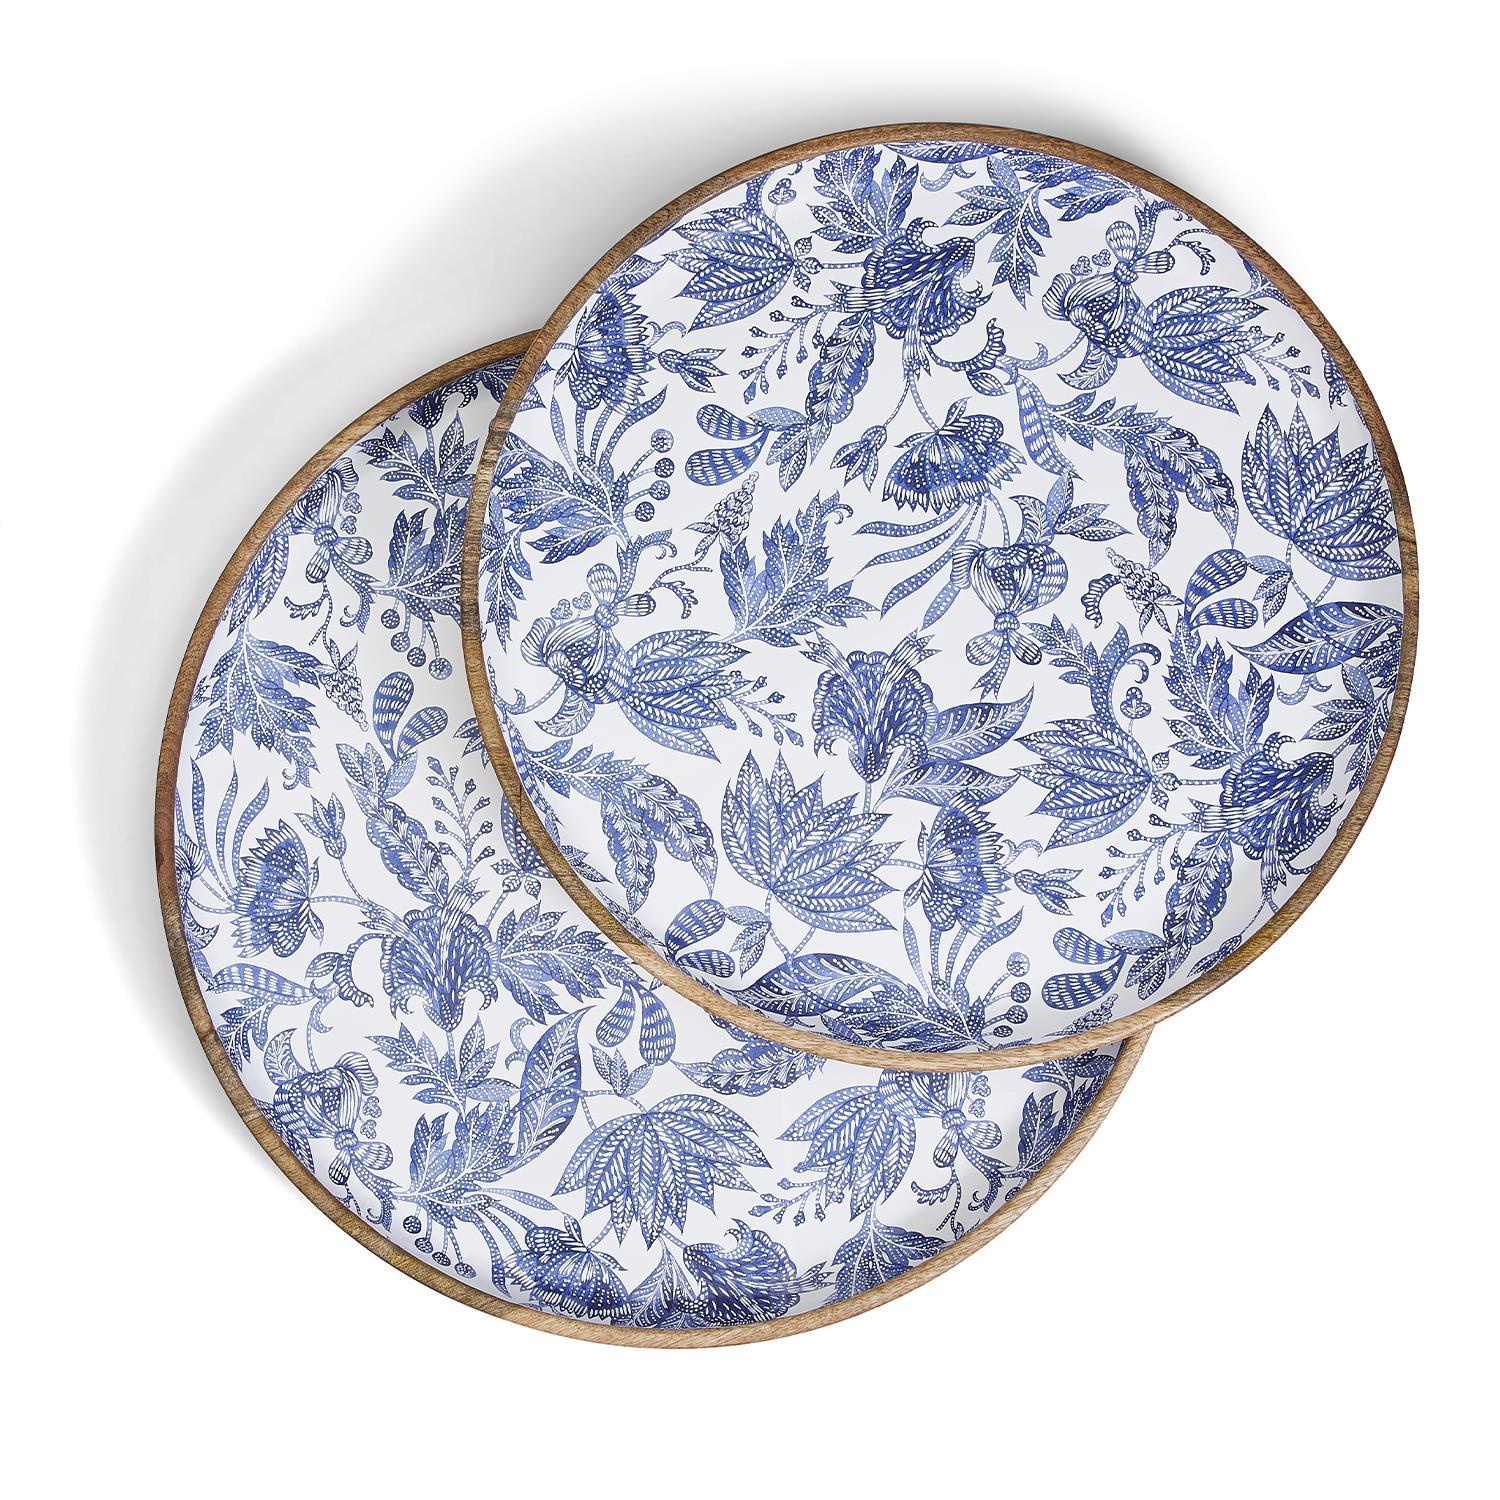 Two's Company Blue Batik S/2 Hand-Crafted Wood Round Trays